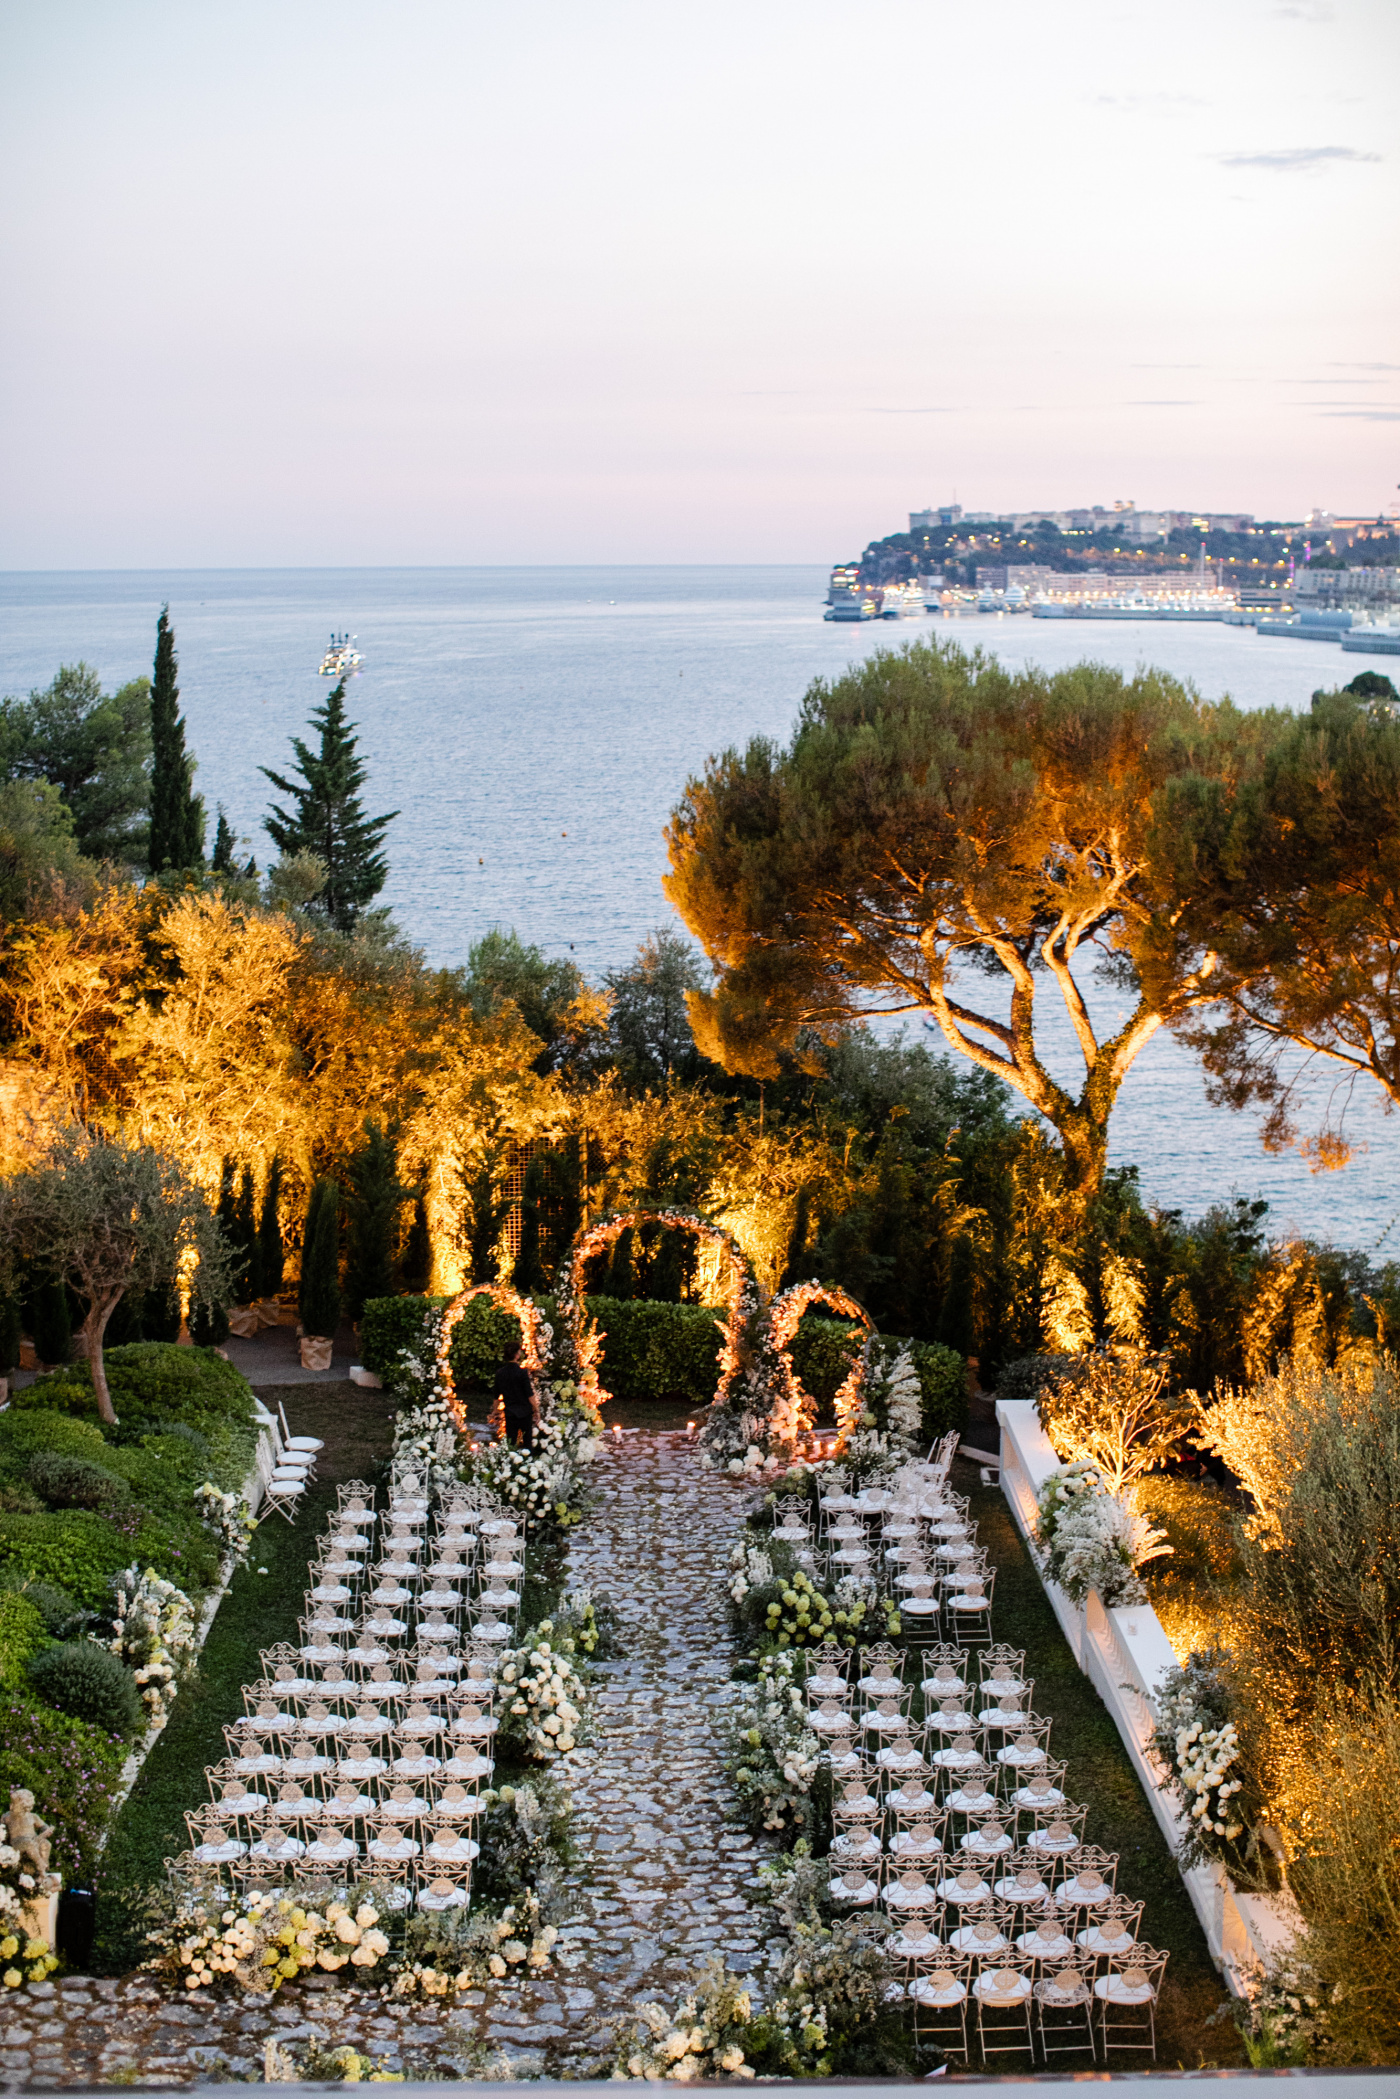 Outdoor ceremony with sea view and white decors and chairs